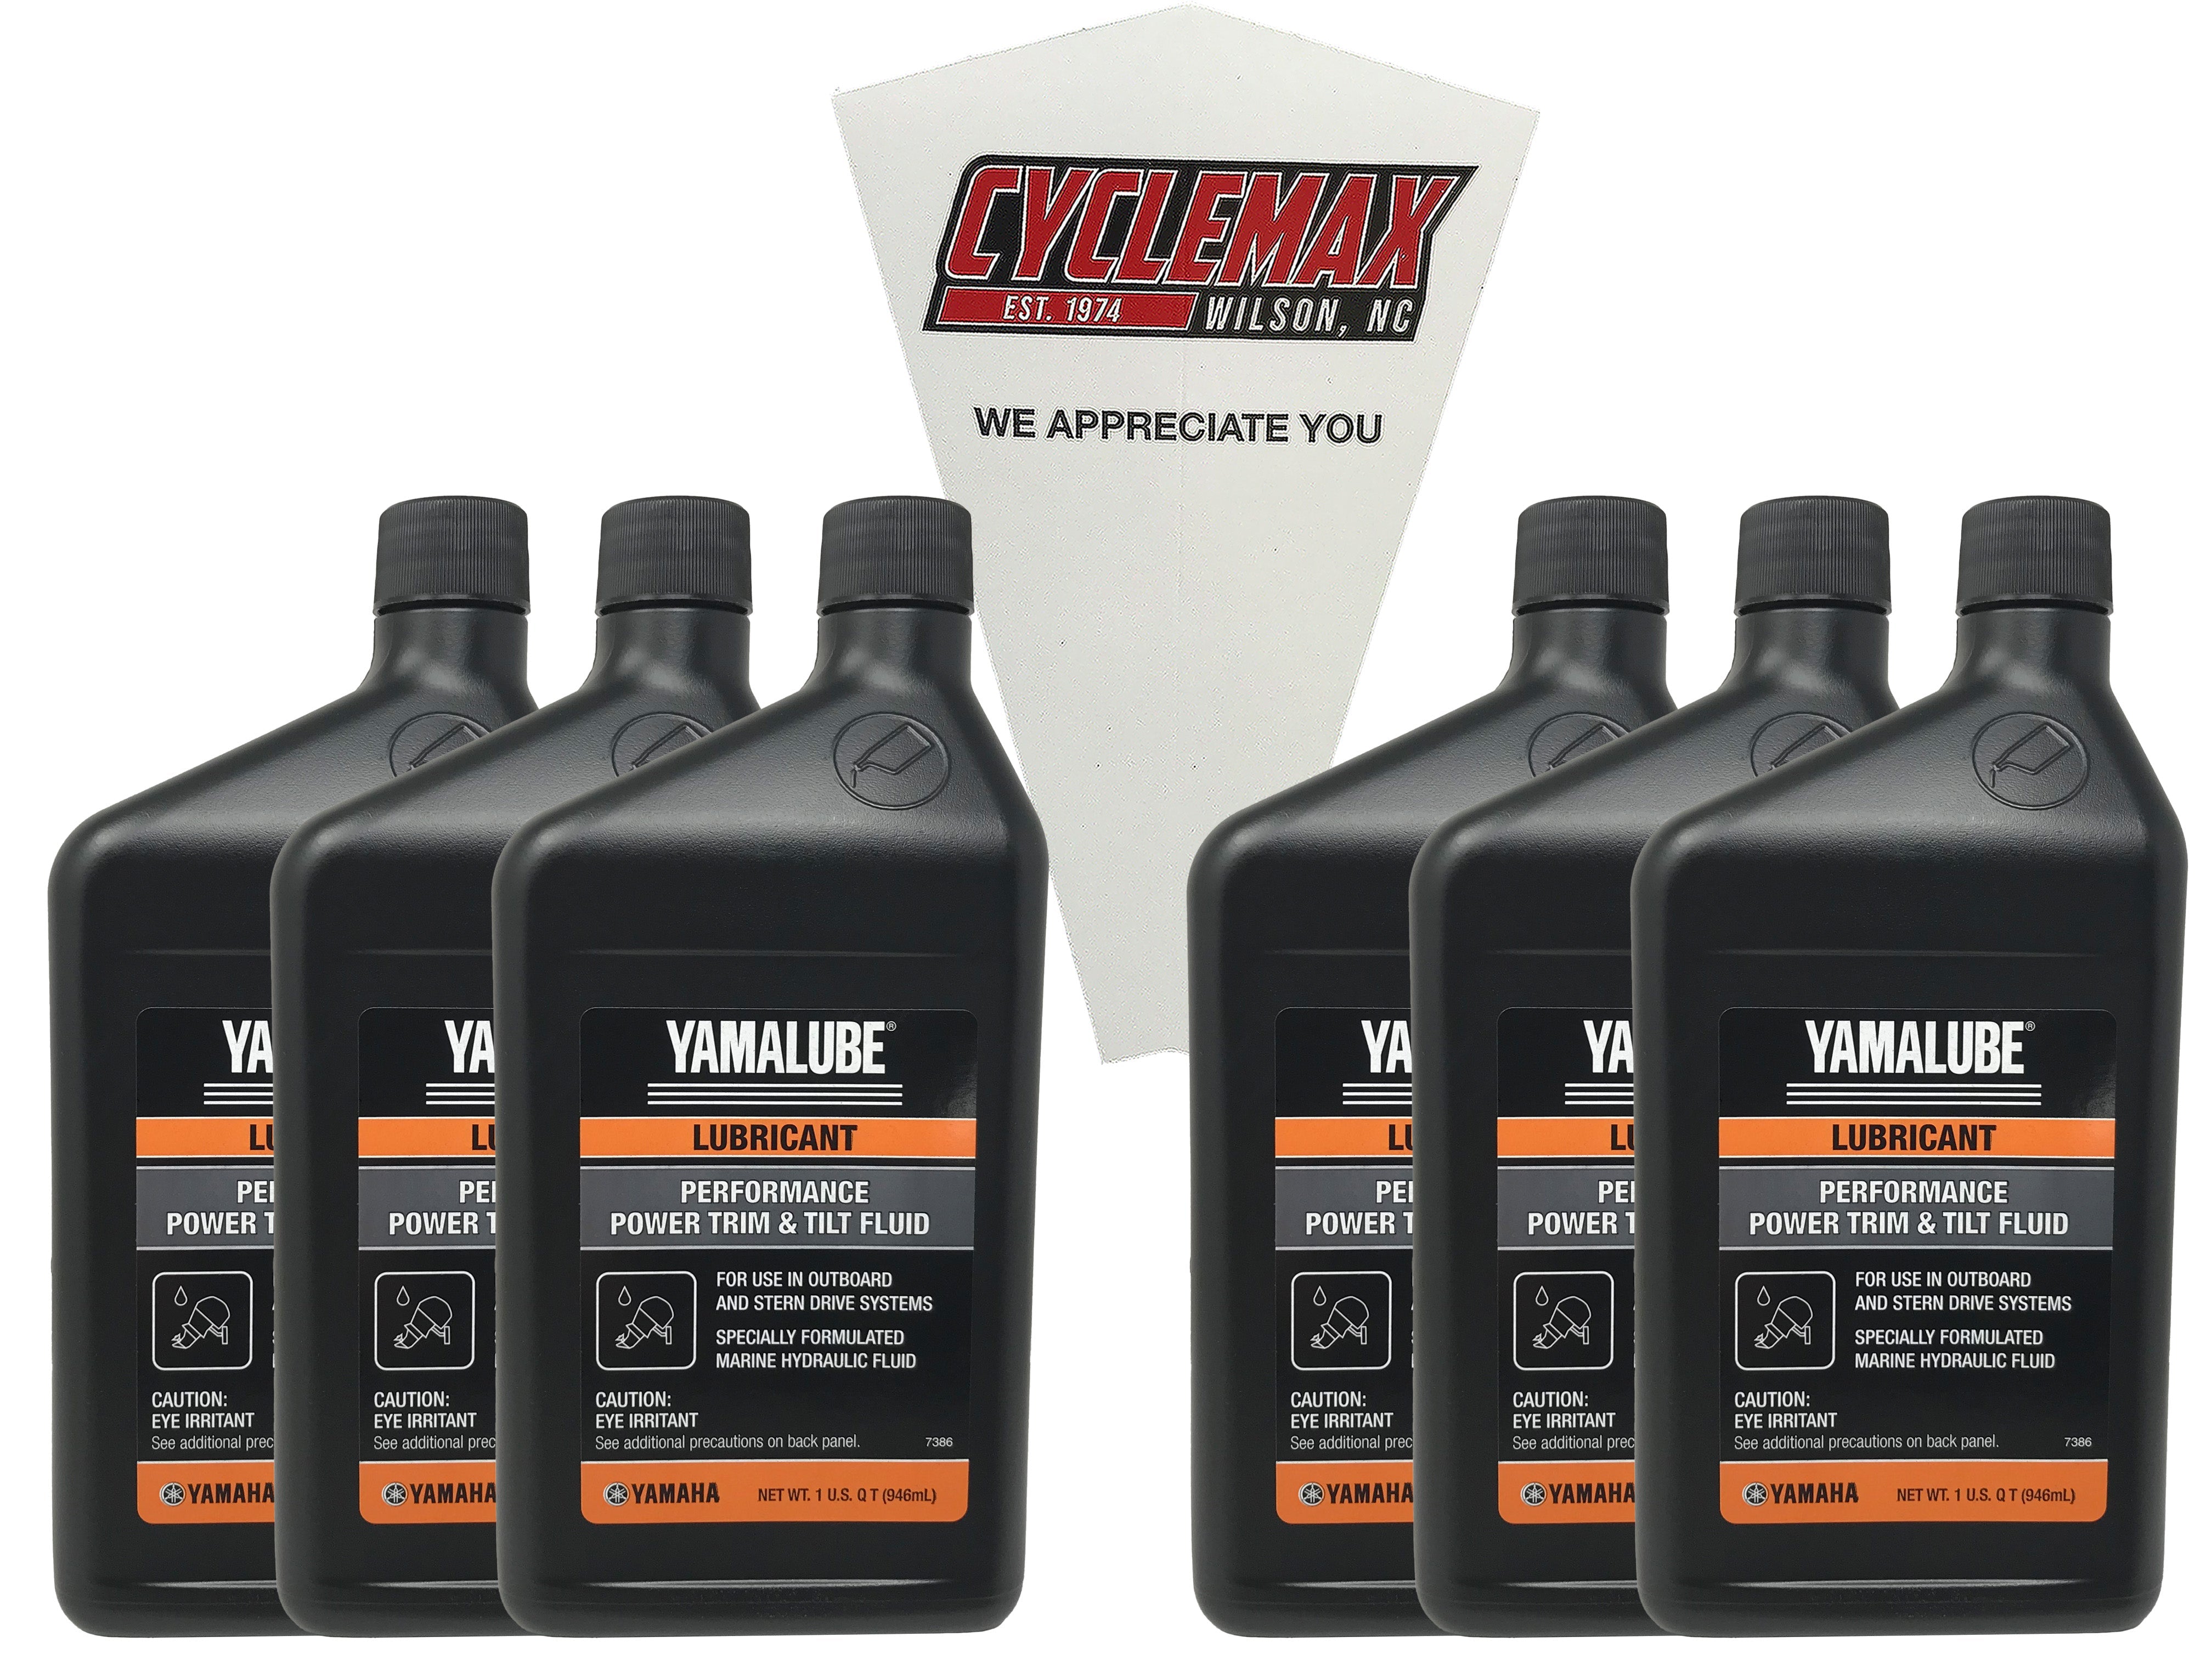 Cyclemax Six Pack for Yamaha Performance Power Trim & Tilt Fluid ACC-PWRTR-MF-32 Contains Six Quarts and a Funnel